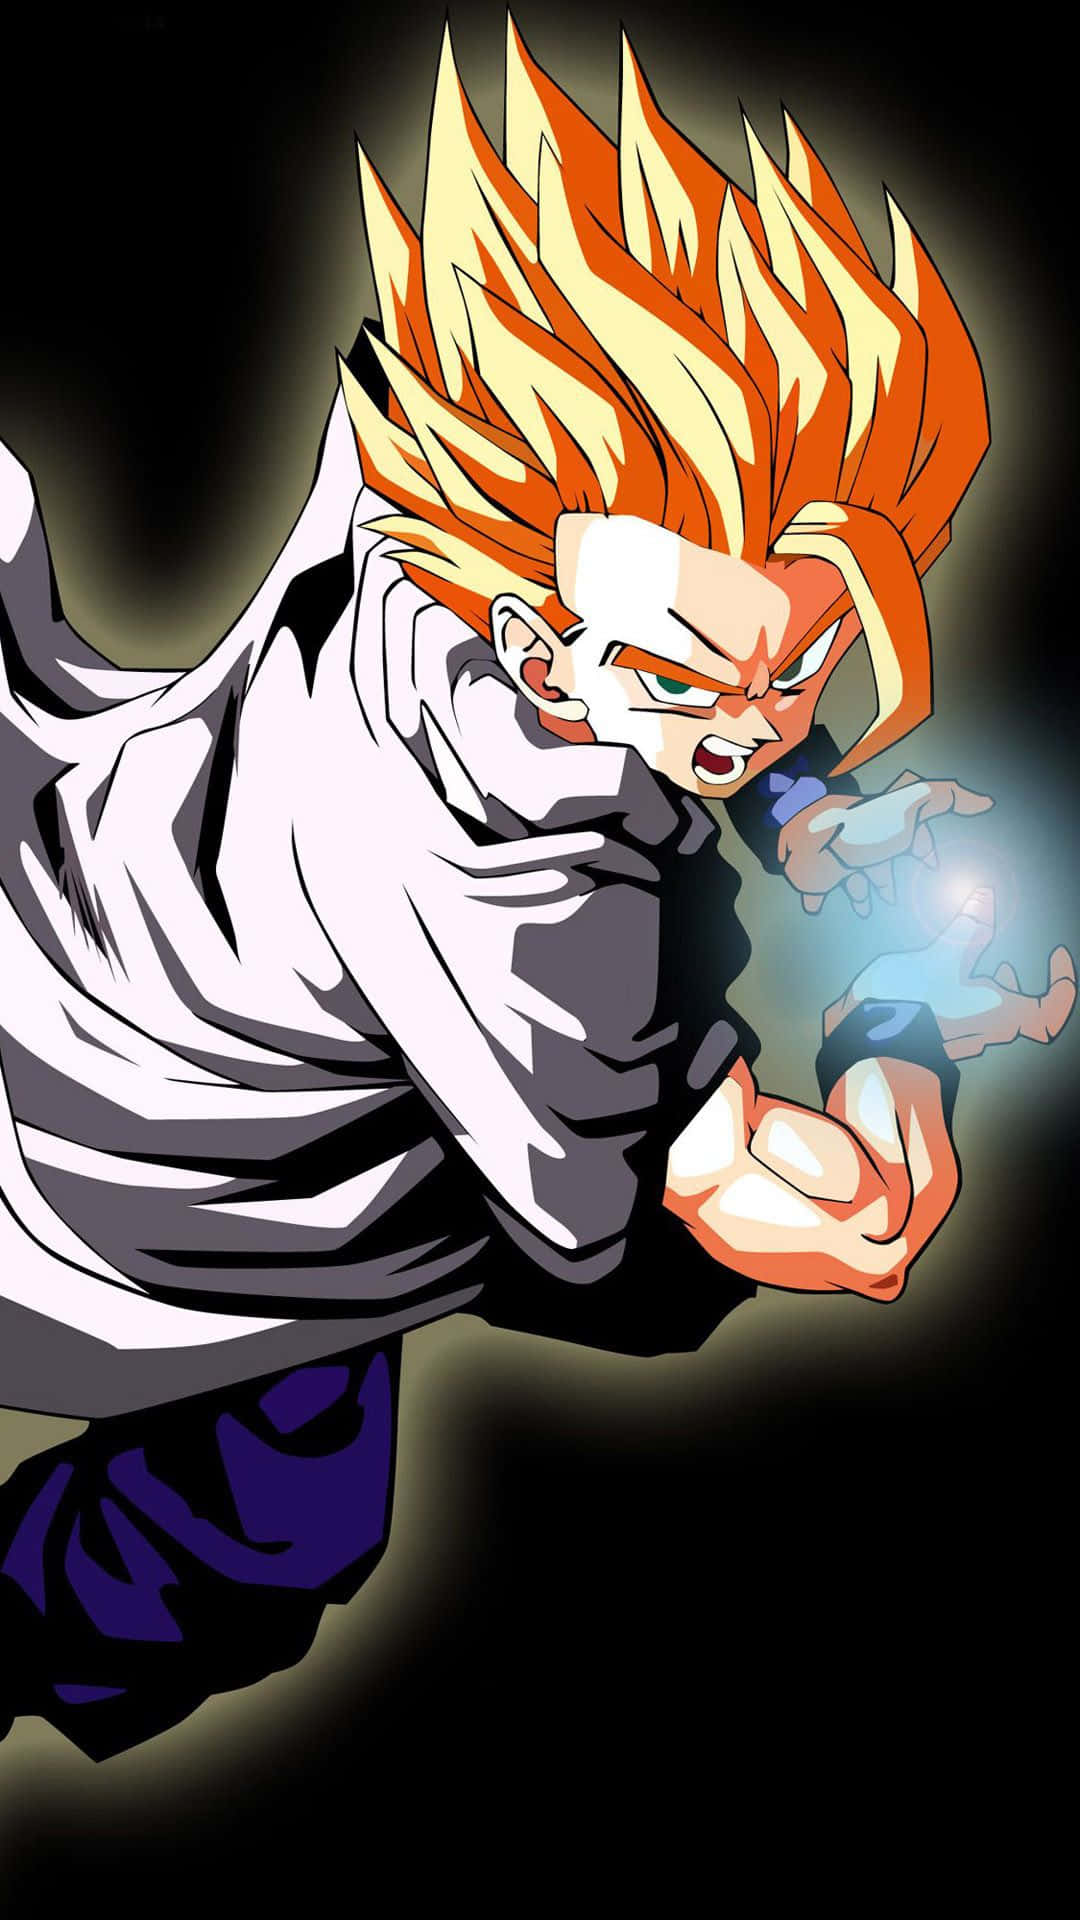 Stay up to date with your favorite franchise with the Dragon Ball Z Phone Wallpaper